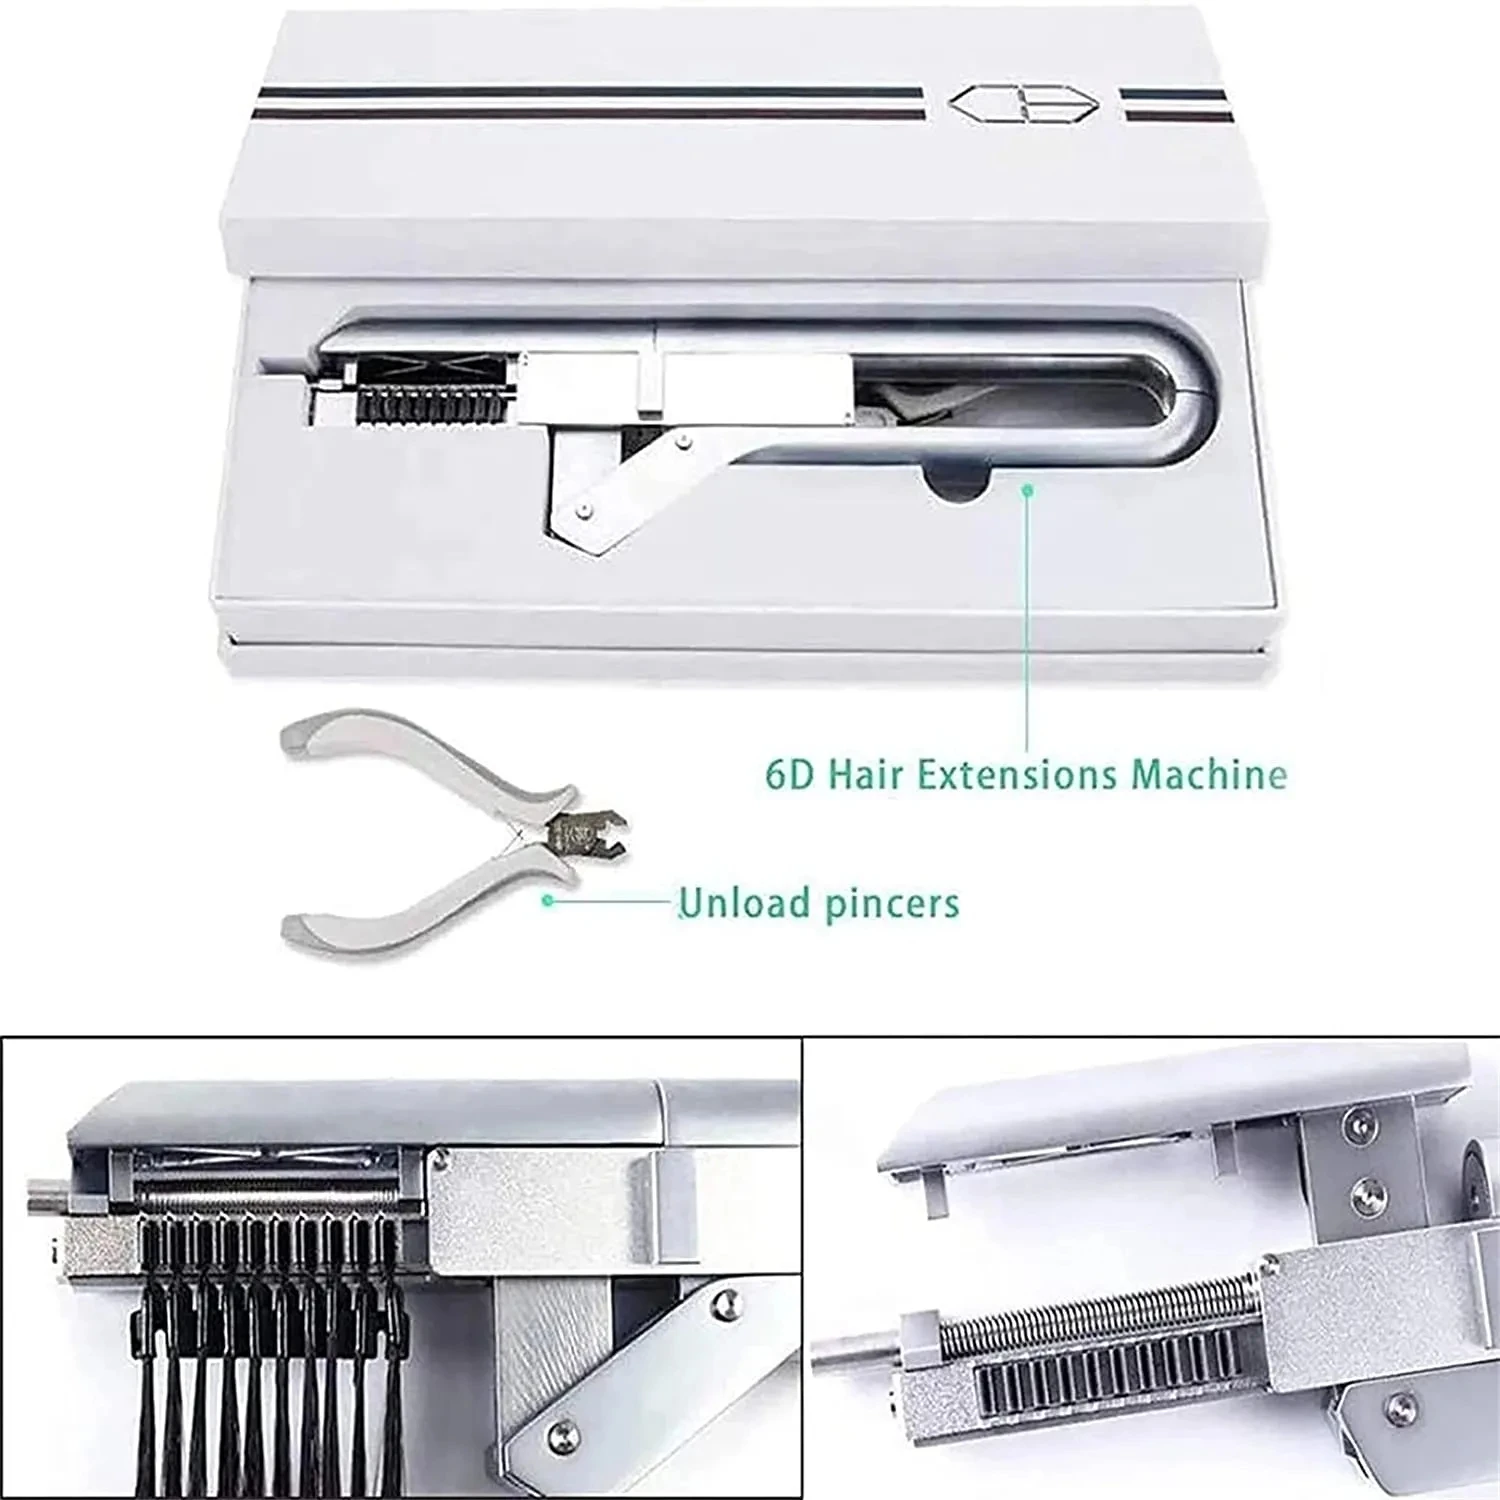  6D Hair Extensions Machine Kit Real Human Hair With Pliers,  No-Trace Hair Extensions Tool For Salon, More Natural And Faster, Ten  Bunches In A Row (Color : 20 Row, Size 